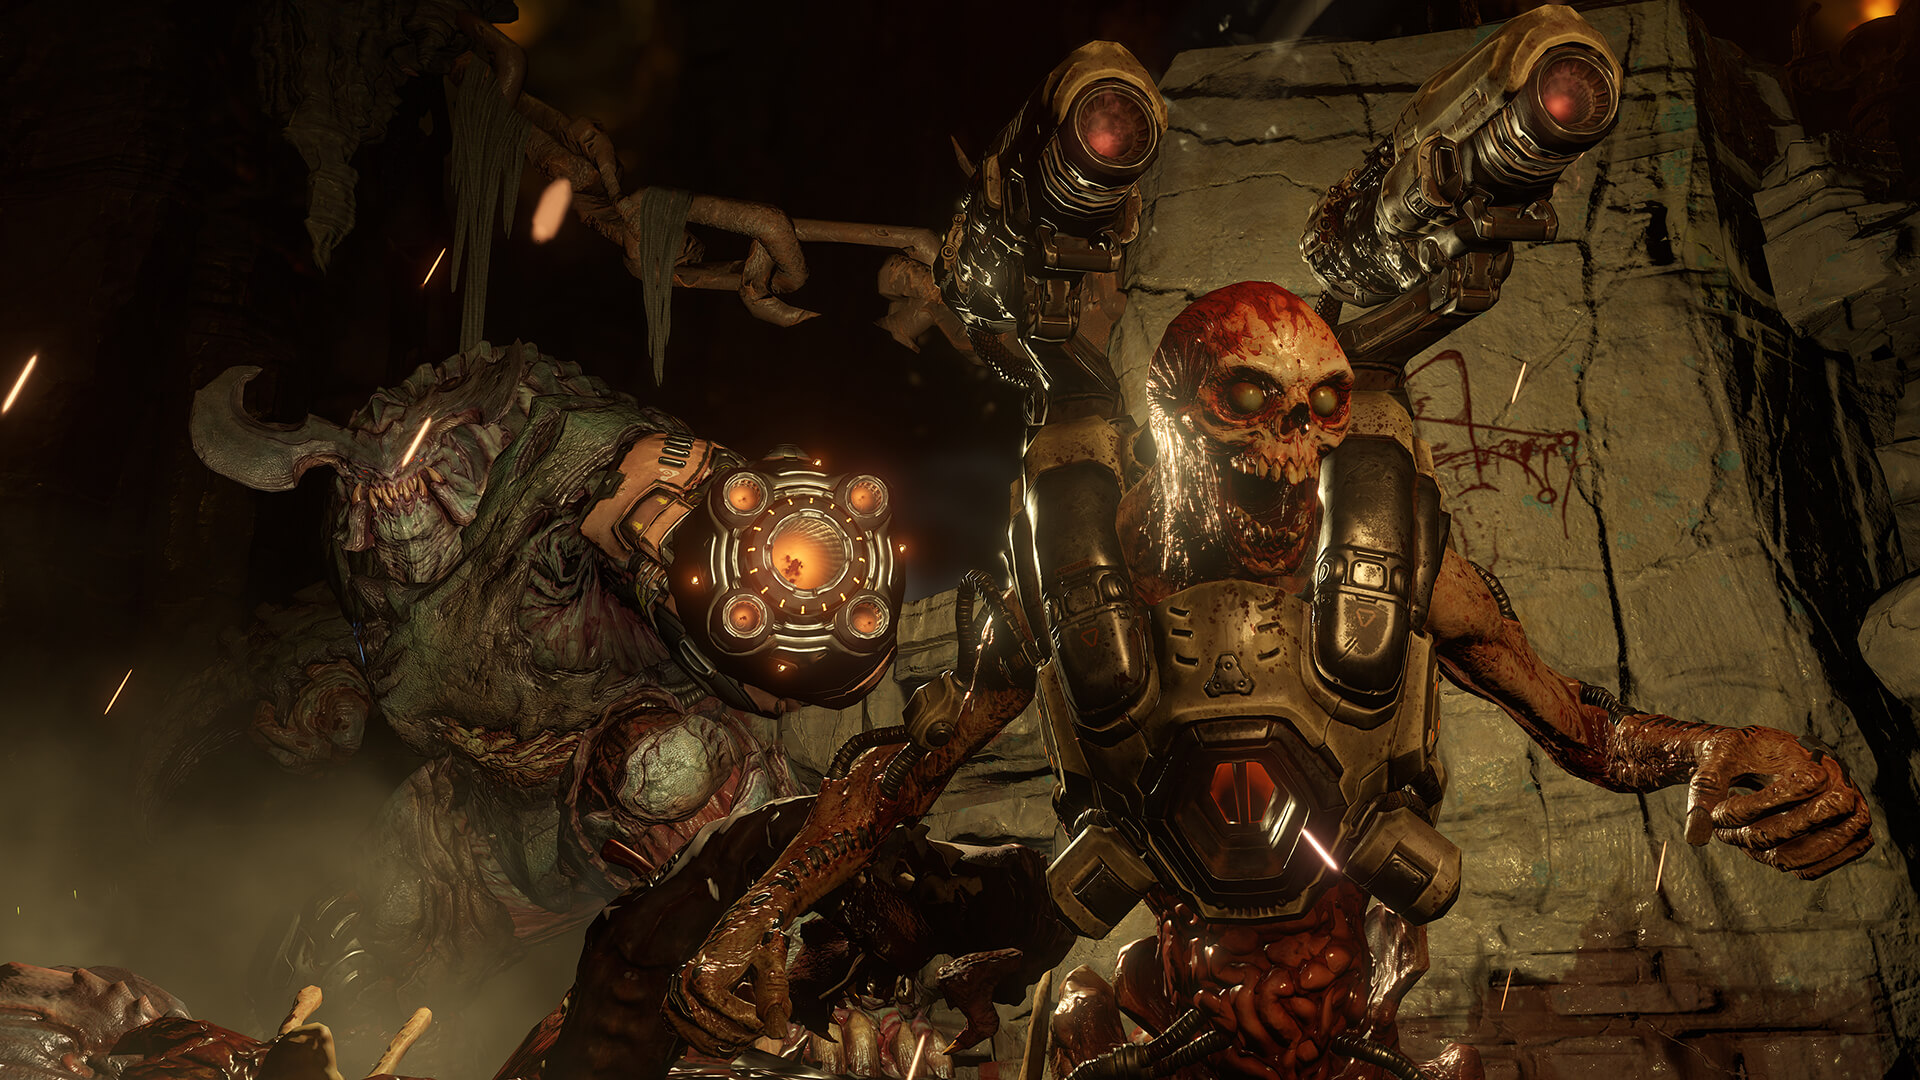 PC version of Doom will have lots of advanced rendering options, no framerate cap